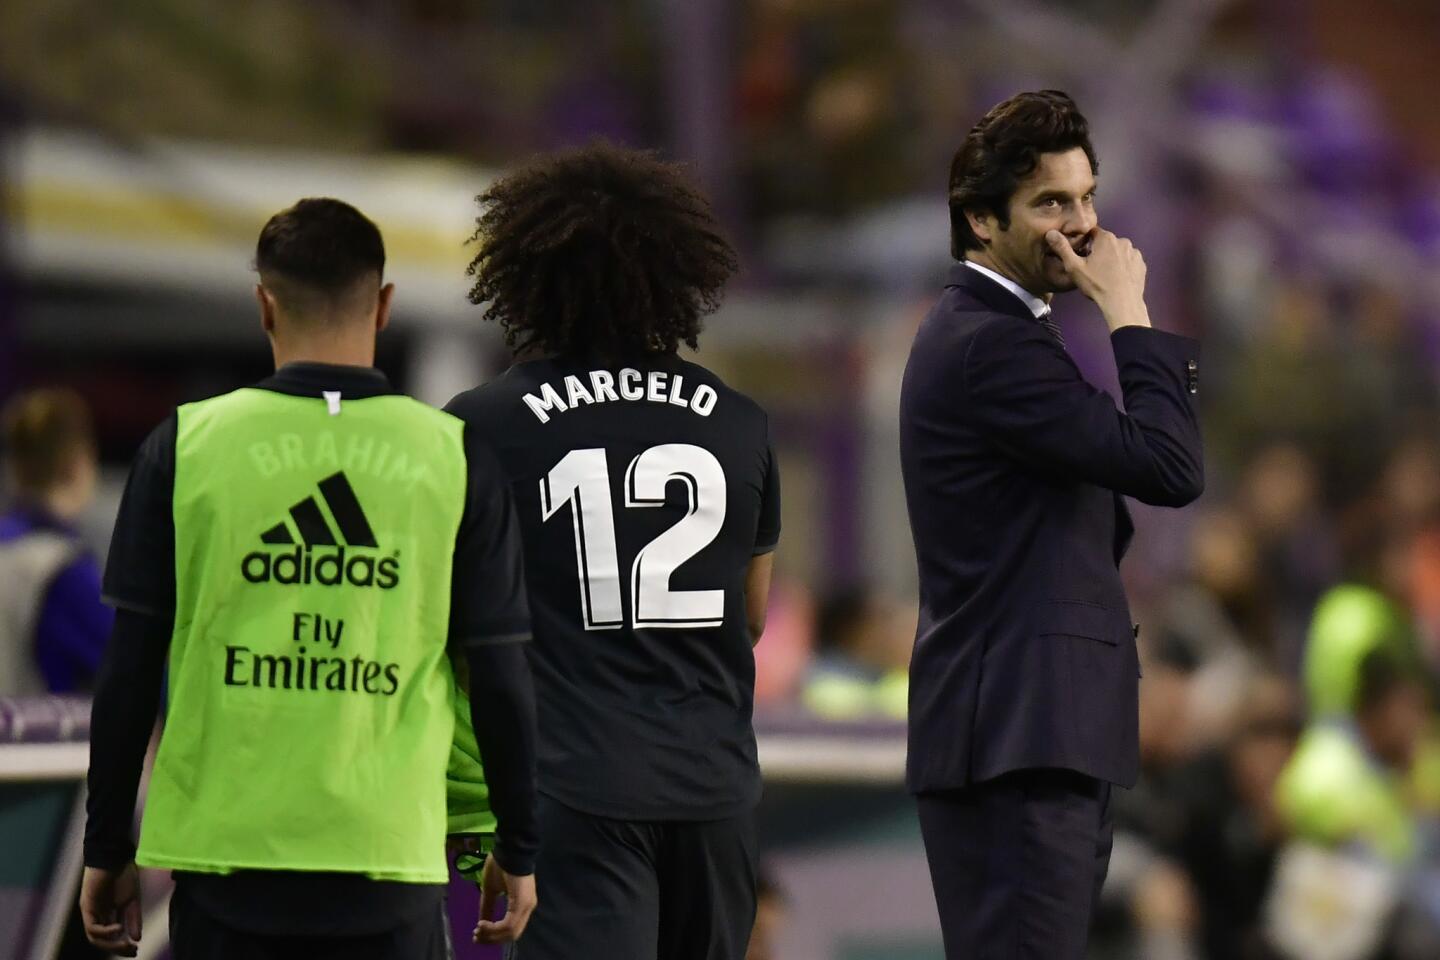 Real Madrid's head manager Santiago Solari gives instructions to Marcelo Vieira during the Spanish La Liga soccer match between Real Madrid and Valladoid FC at Jose Zorrila New stadium in Valladolid, northern Spain, Sunday, March 10, 2019.